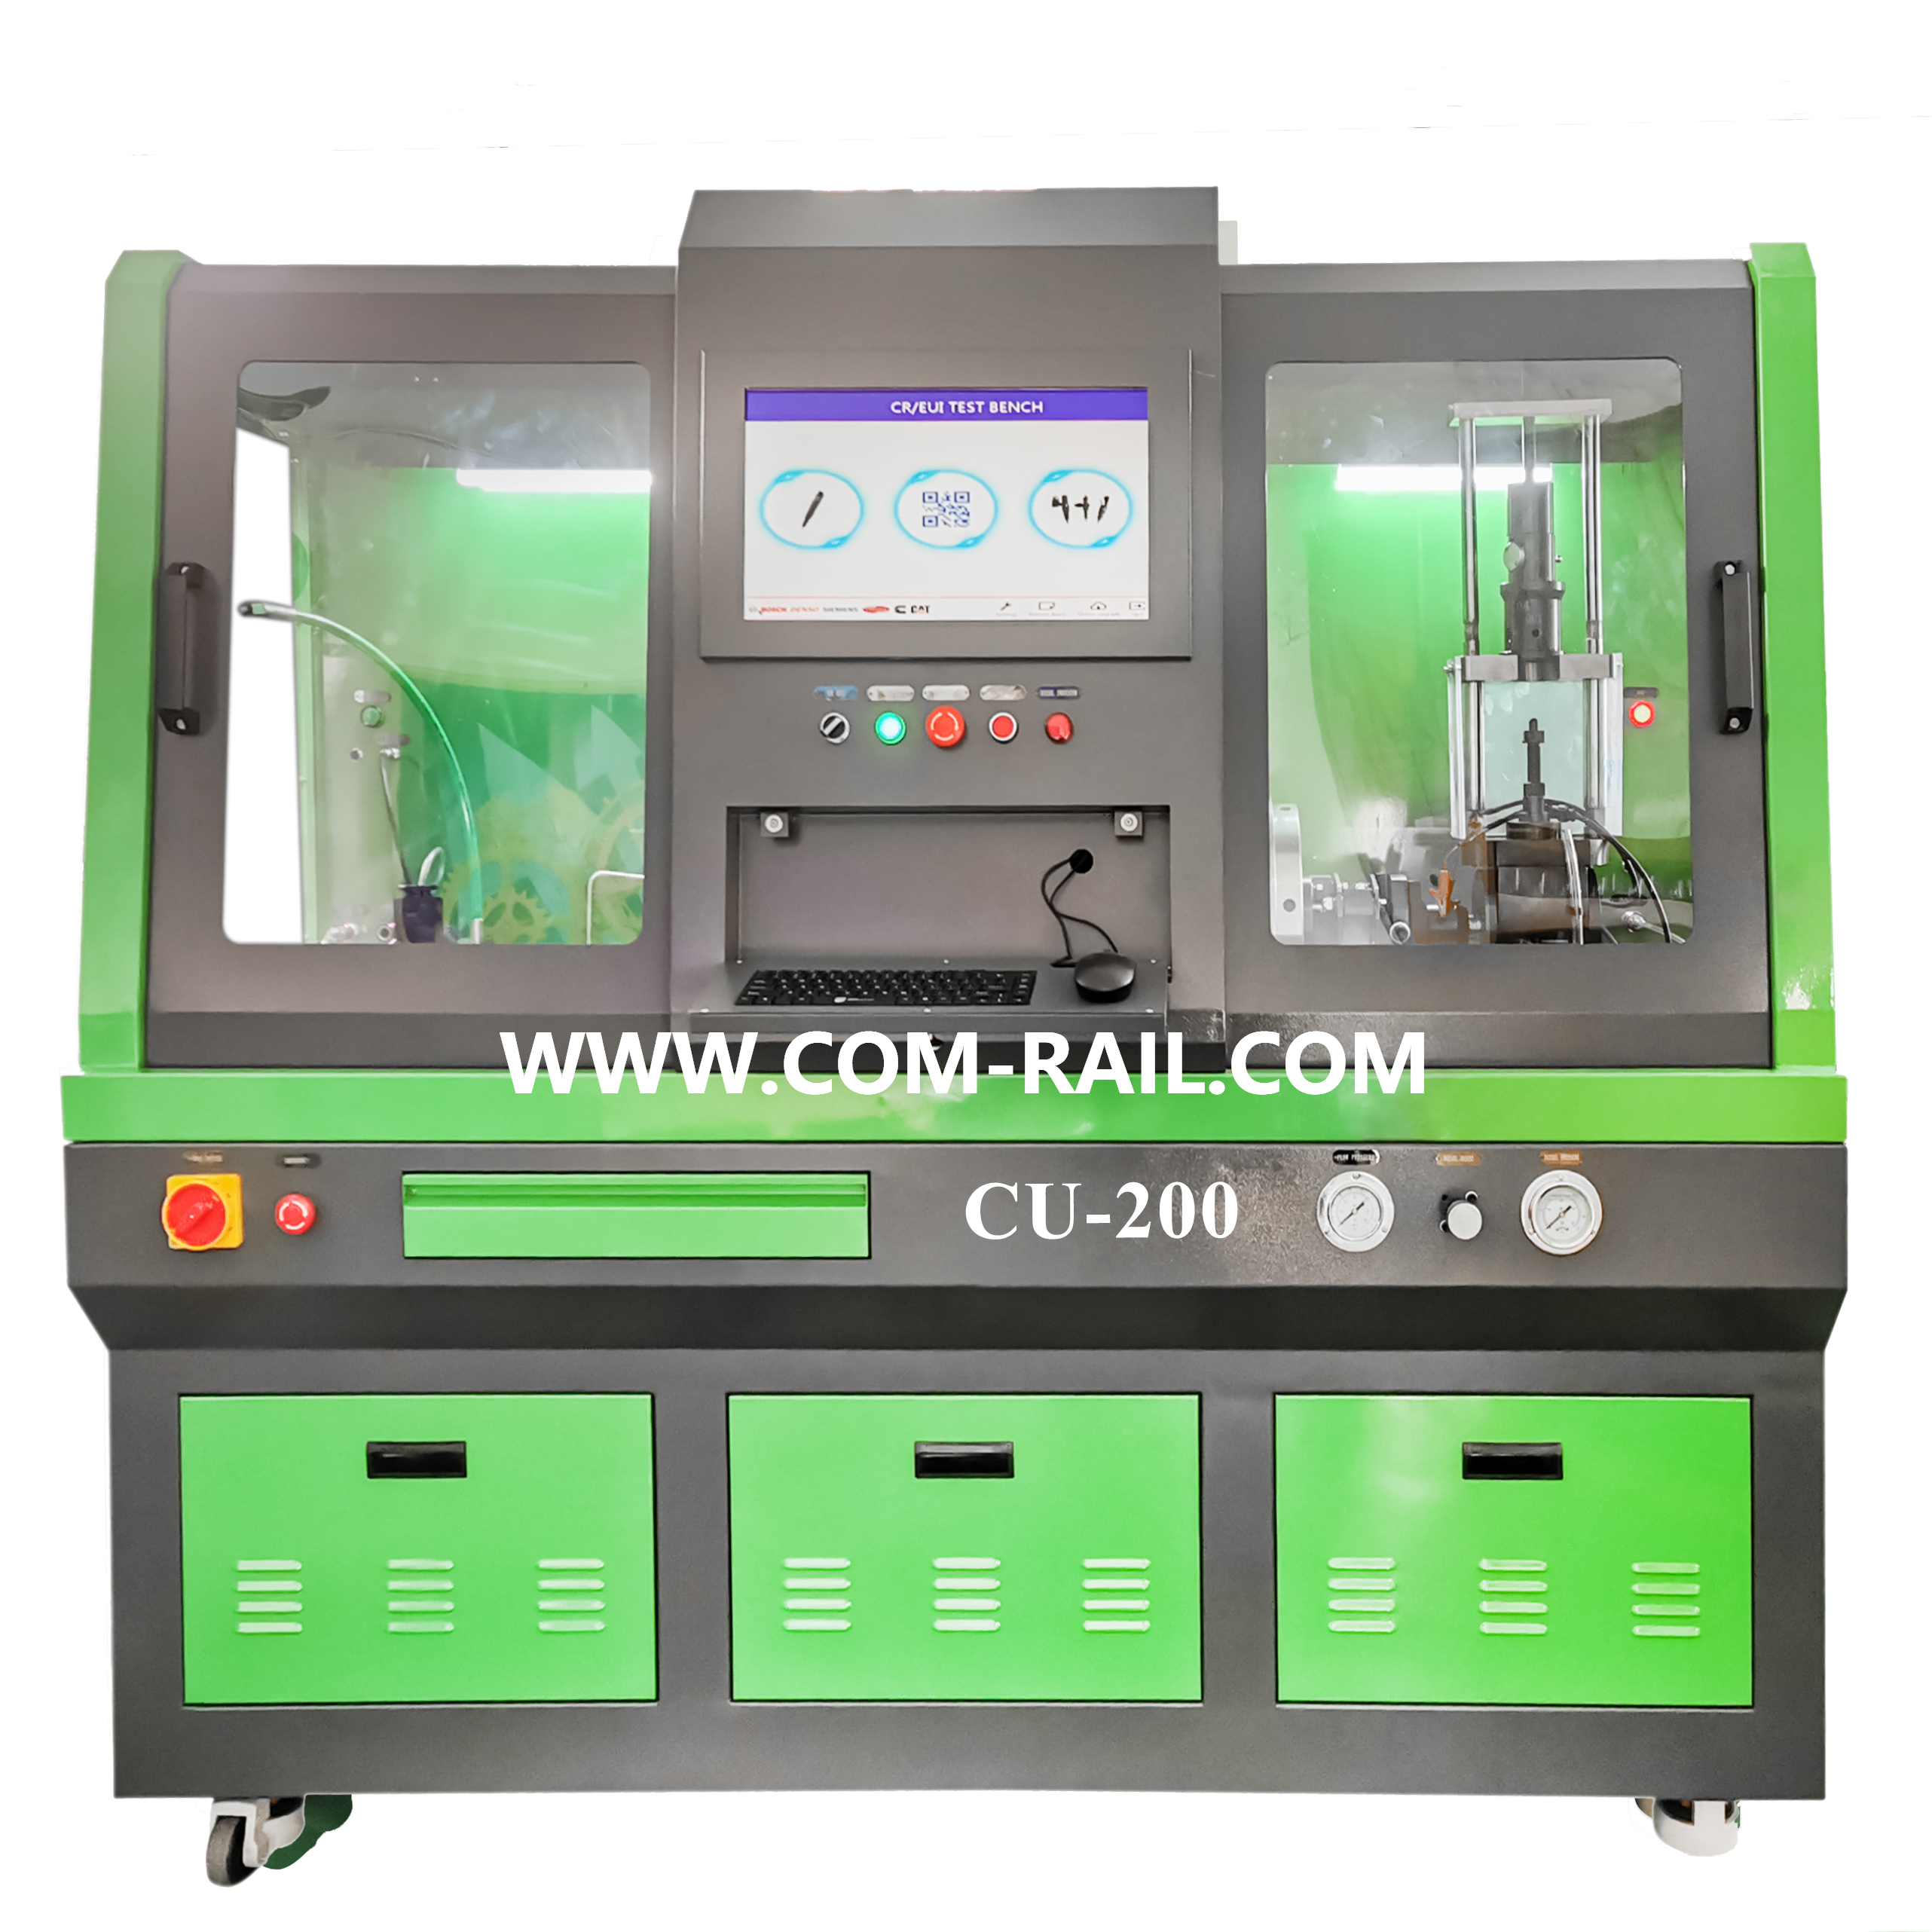 Low MOQ for Common Rail Injector And Pump Test Bench - CU-200 common rail injector and EUI/EUP test bench  – Common